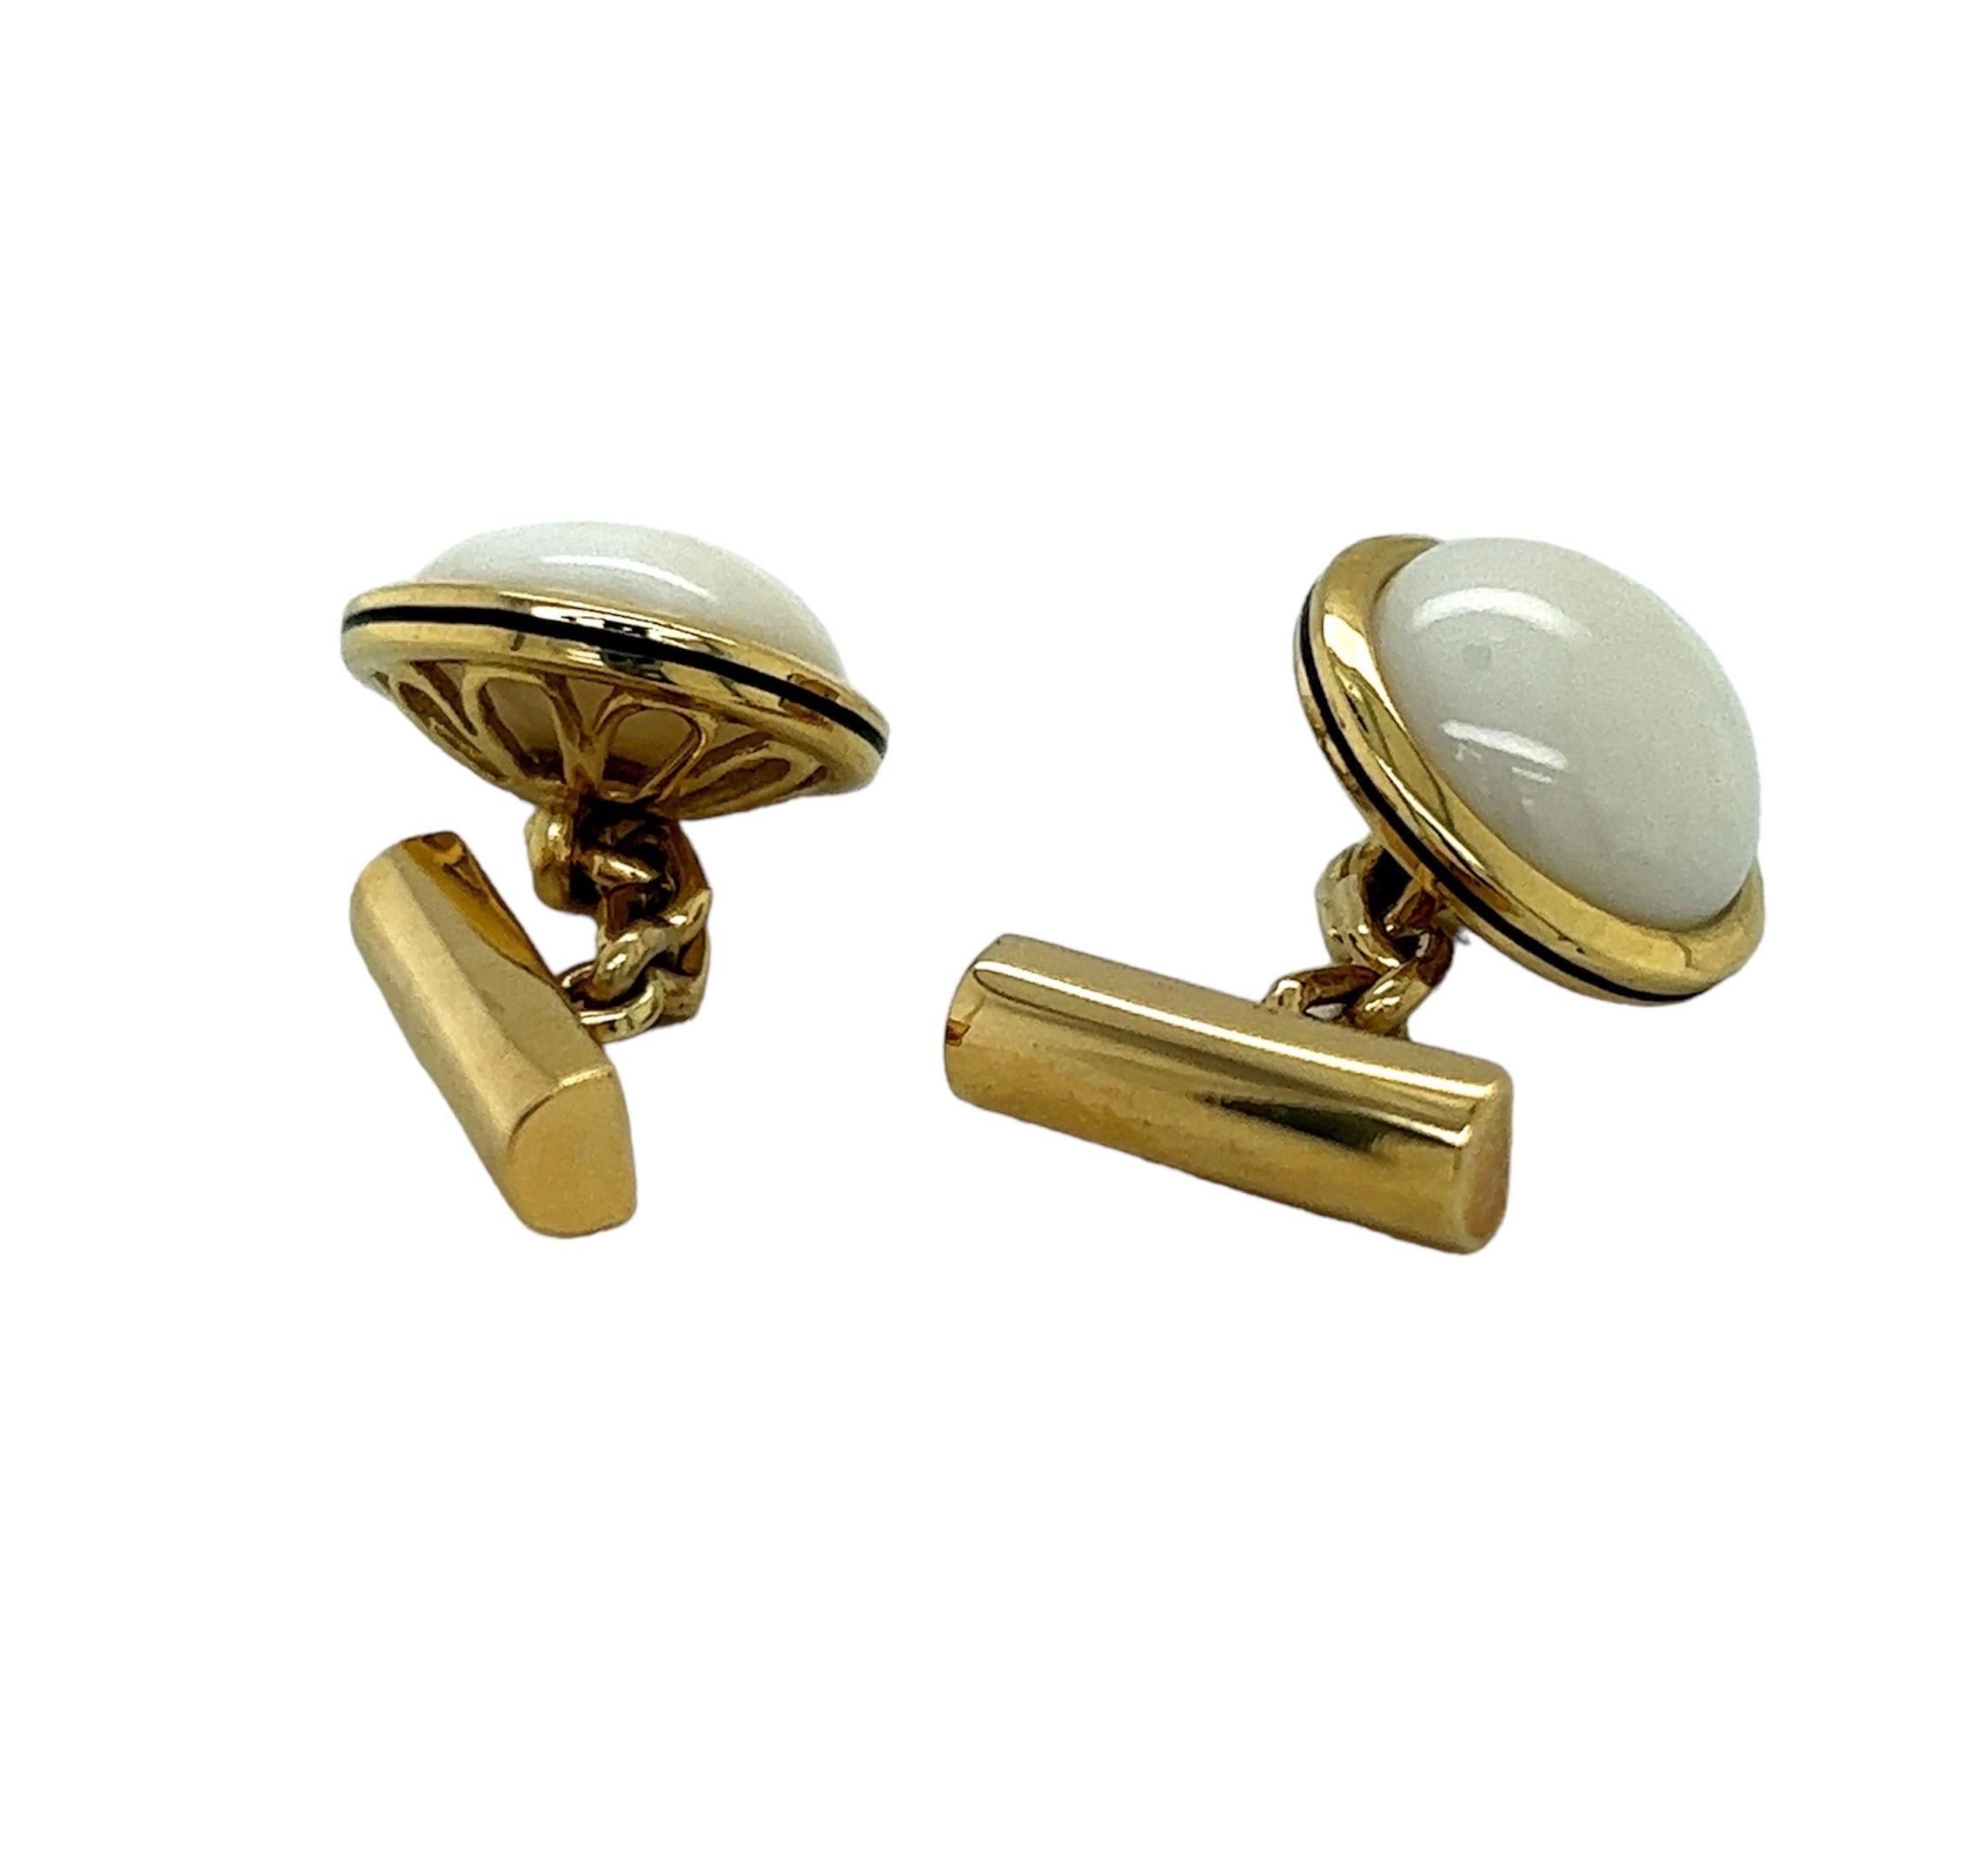 These cufflinks are a stunning piece of jewelry that exudes elegance and sophistication. The cufflinks are crafted from 18k yellow gold, a high-quality material that is known for its durability, luster, and rich color. The gold is carefully crafted